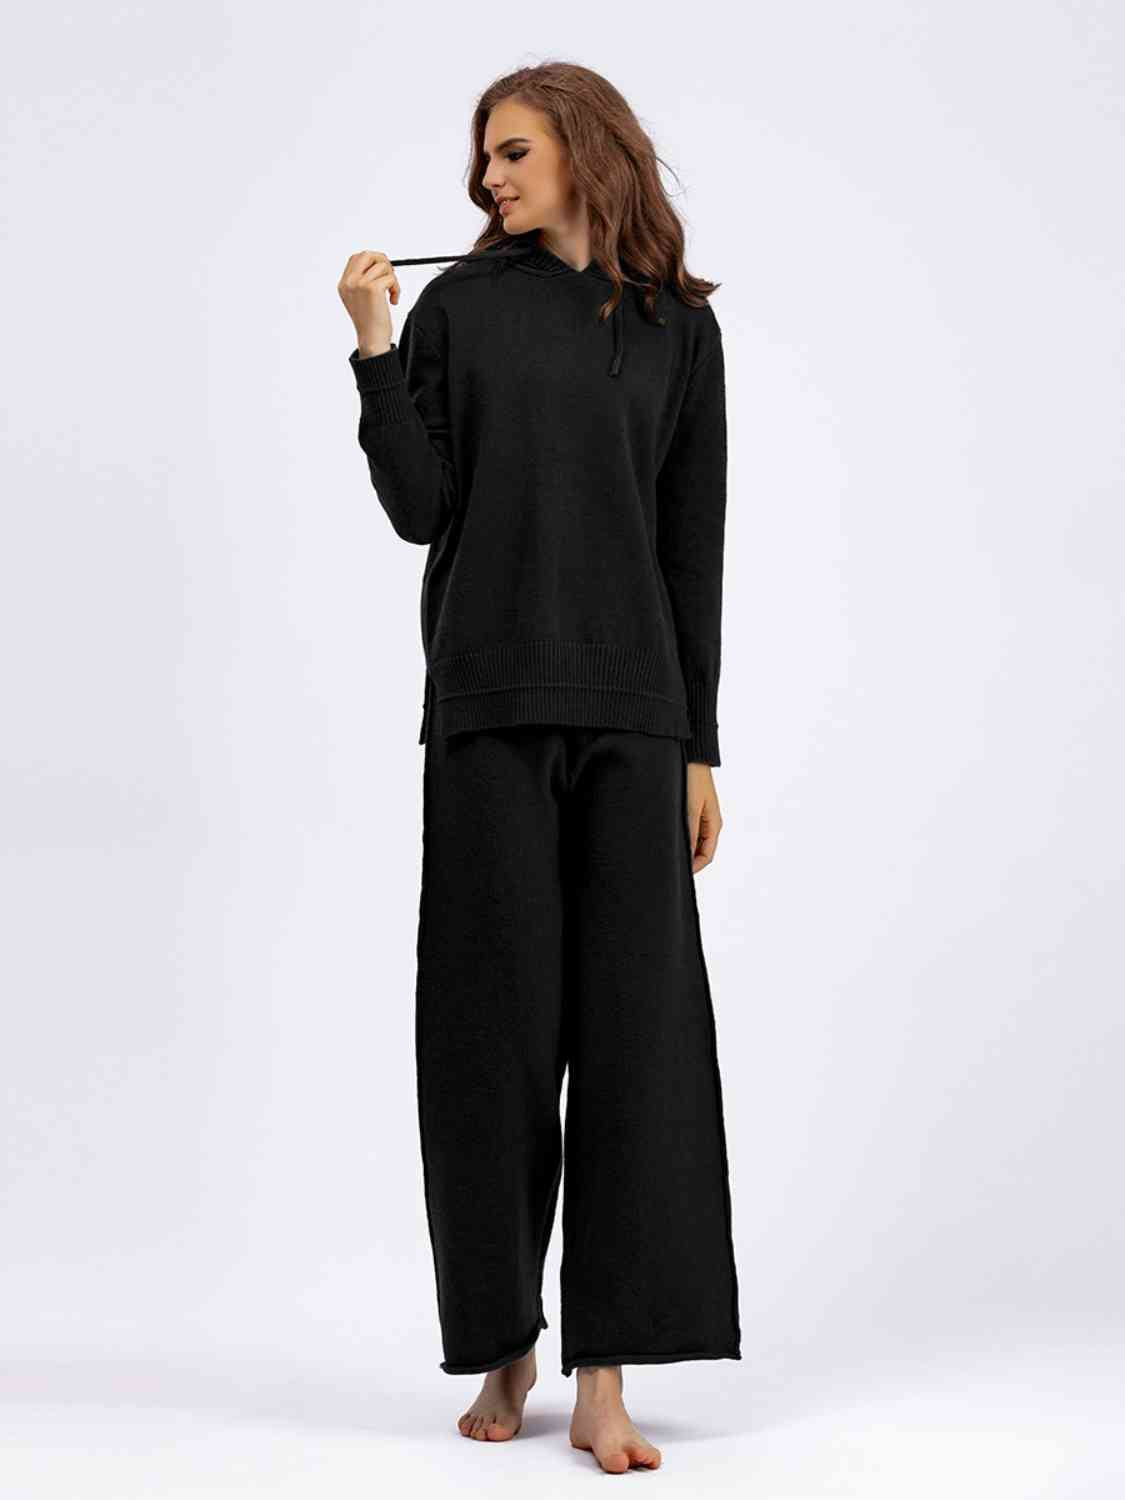 Women's Long Sleeve Hooded Sweater and Knit Pants Set